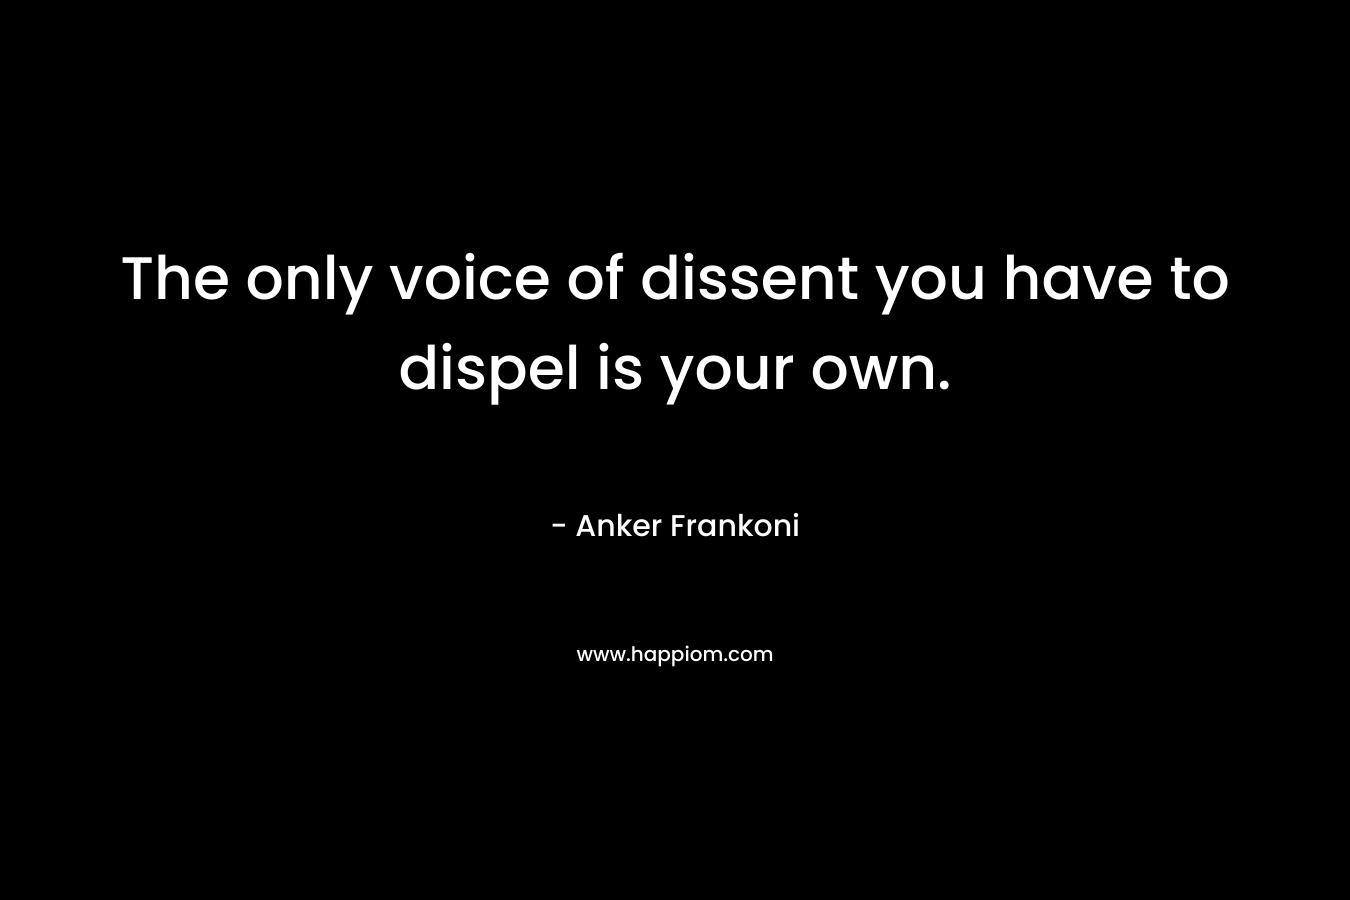 The only voice of dissent you have to dispel is your own.